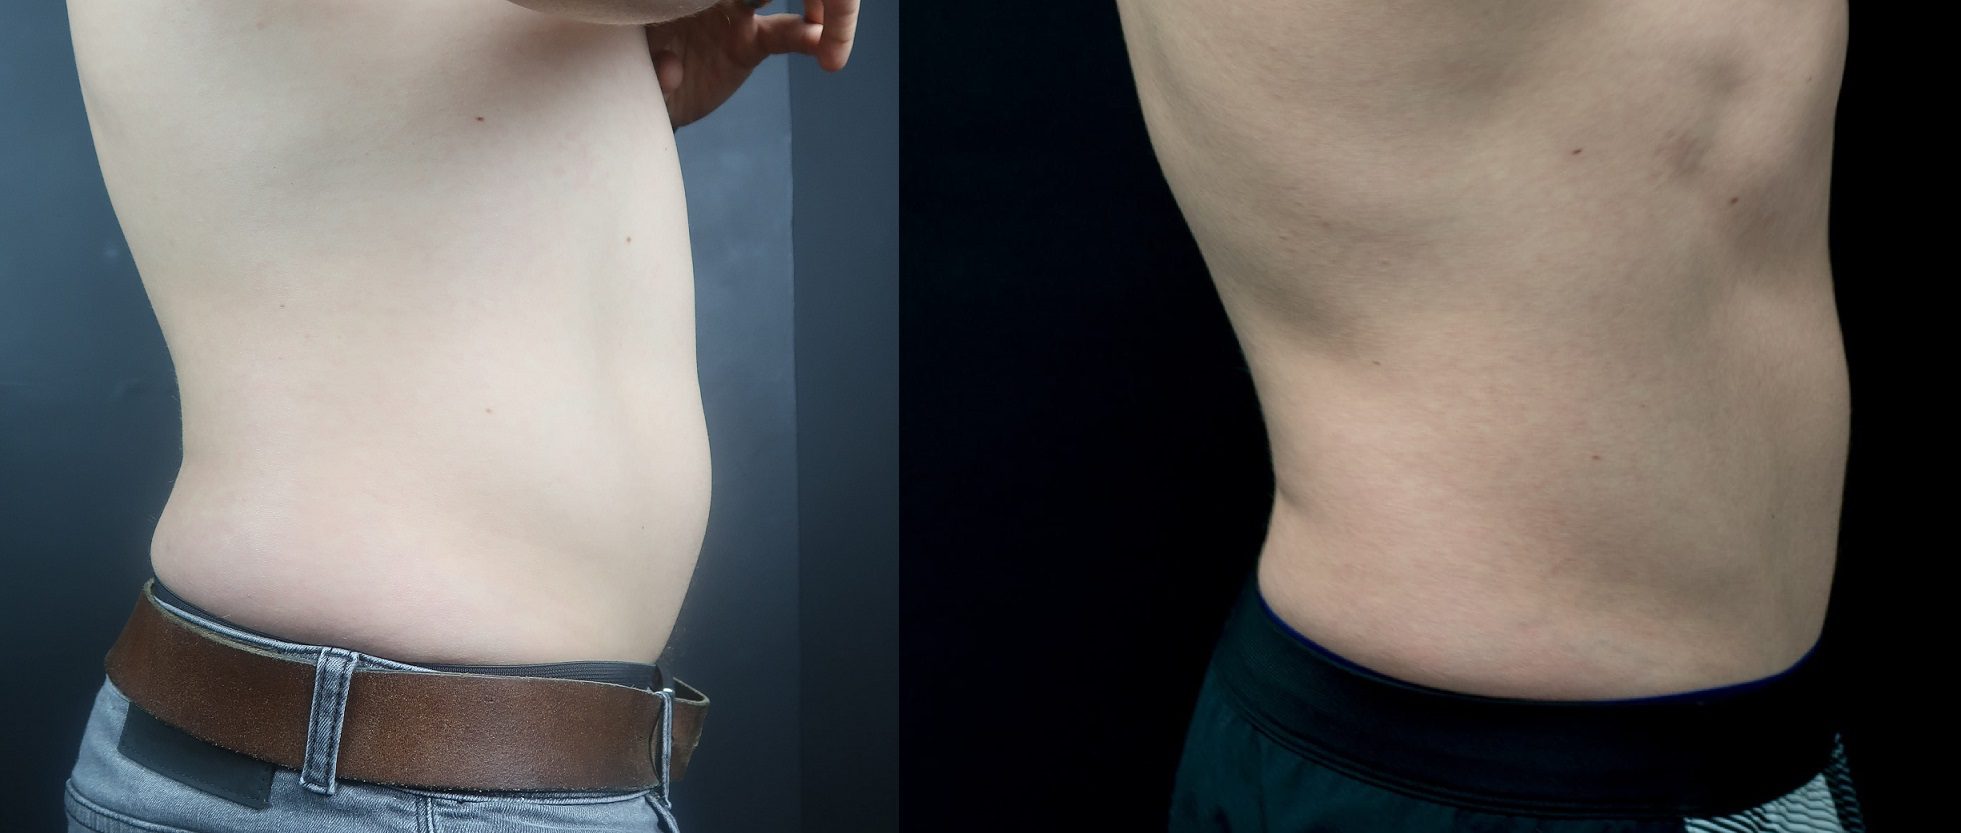 belly fat coolsculpting fat freezing before and after